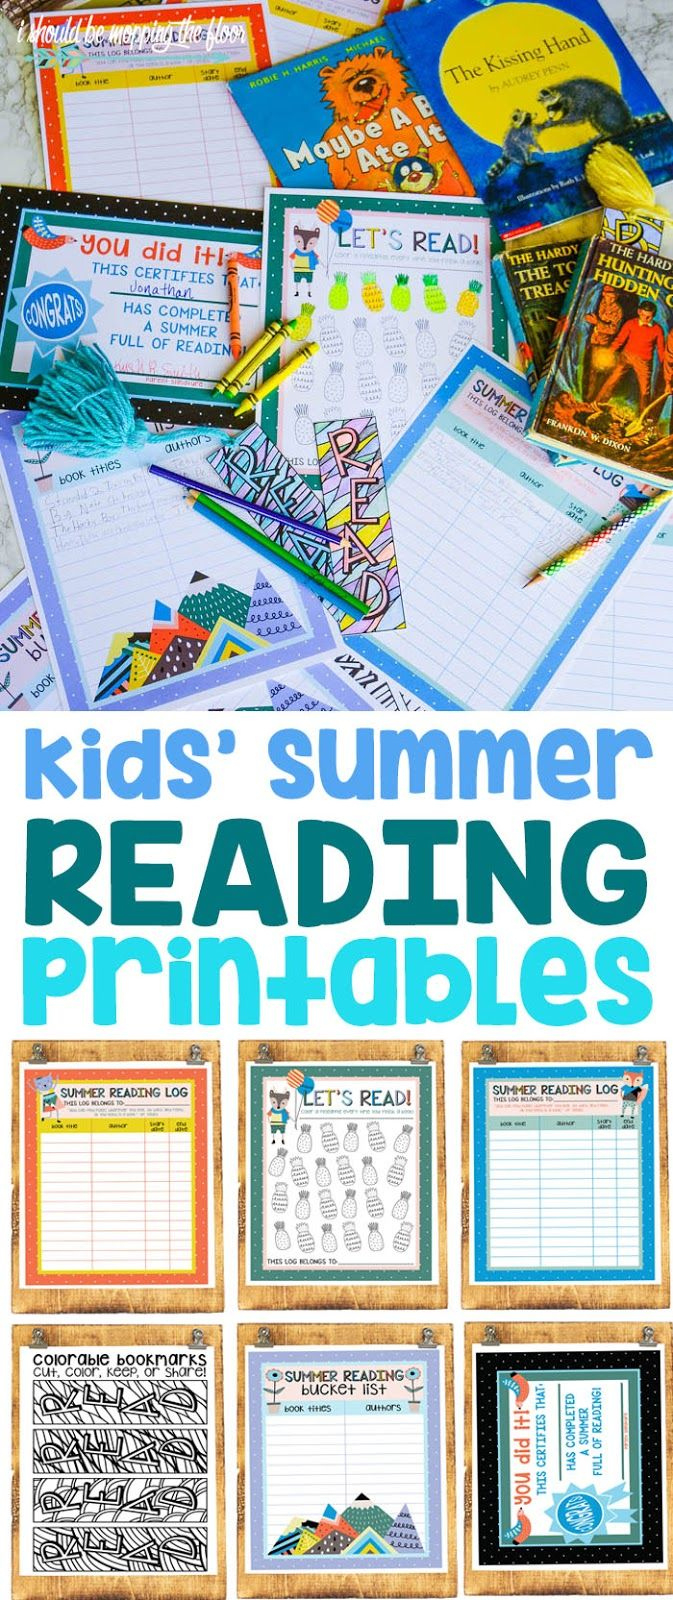 5778 Best Printables Images On Pinterest  Free Printable throughout Summer Reading Certificate Printable